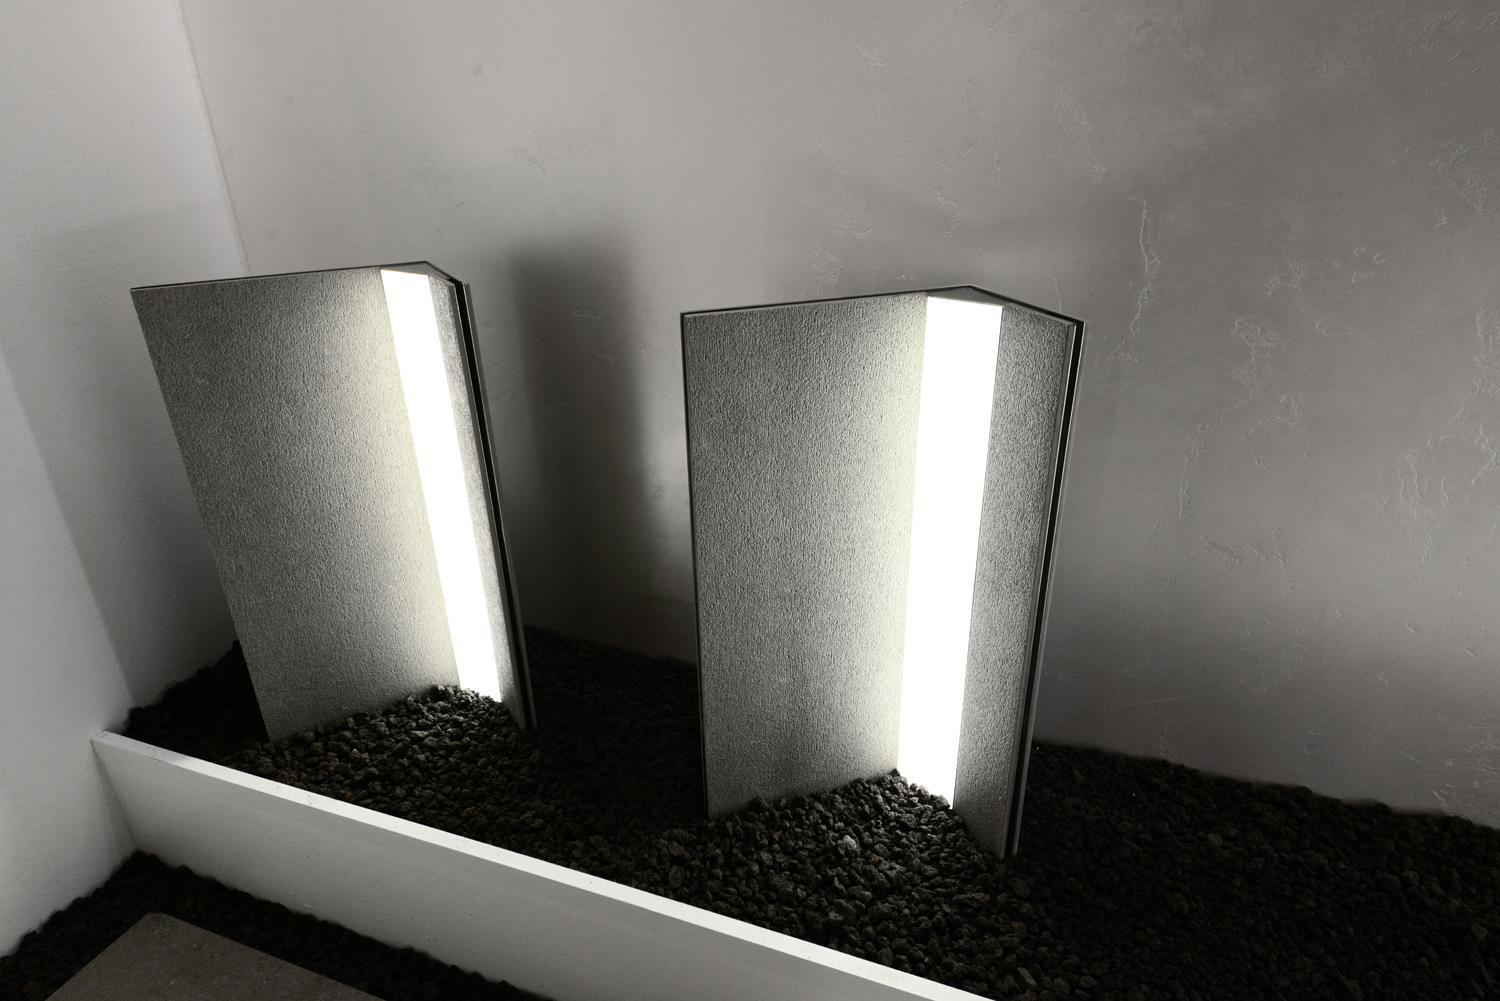 Cotto D'Este announces the winners of "KERLIGHT - Design your light with Kerlite": Photo 4